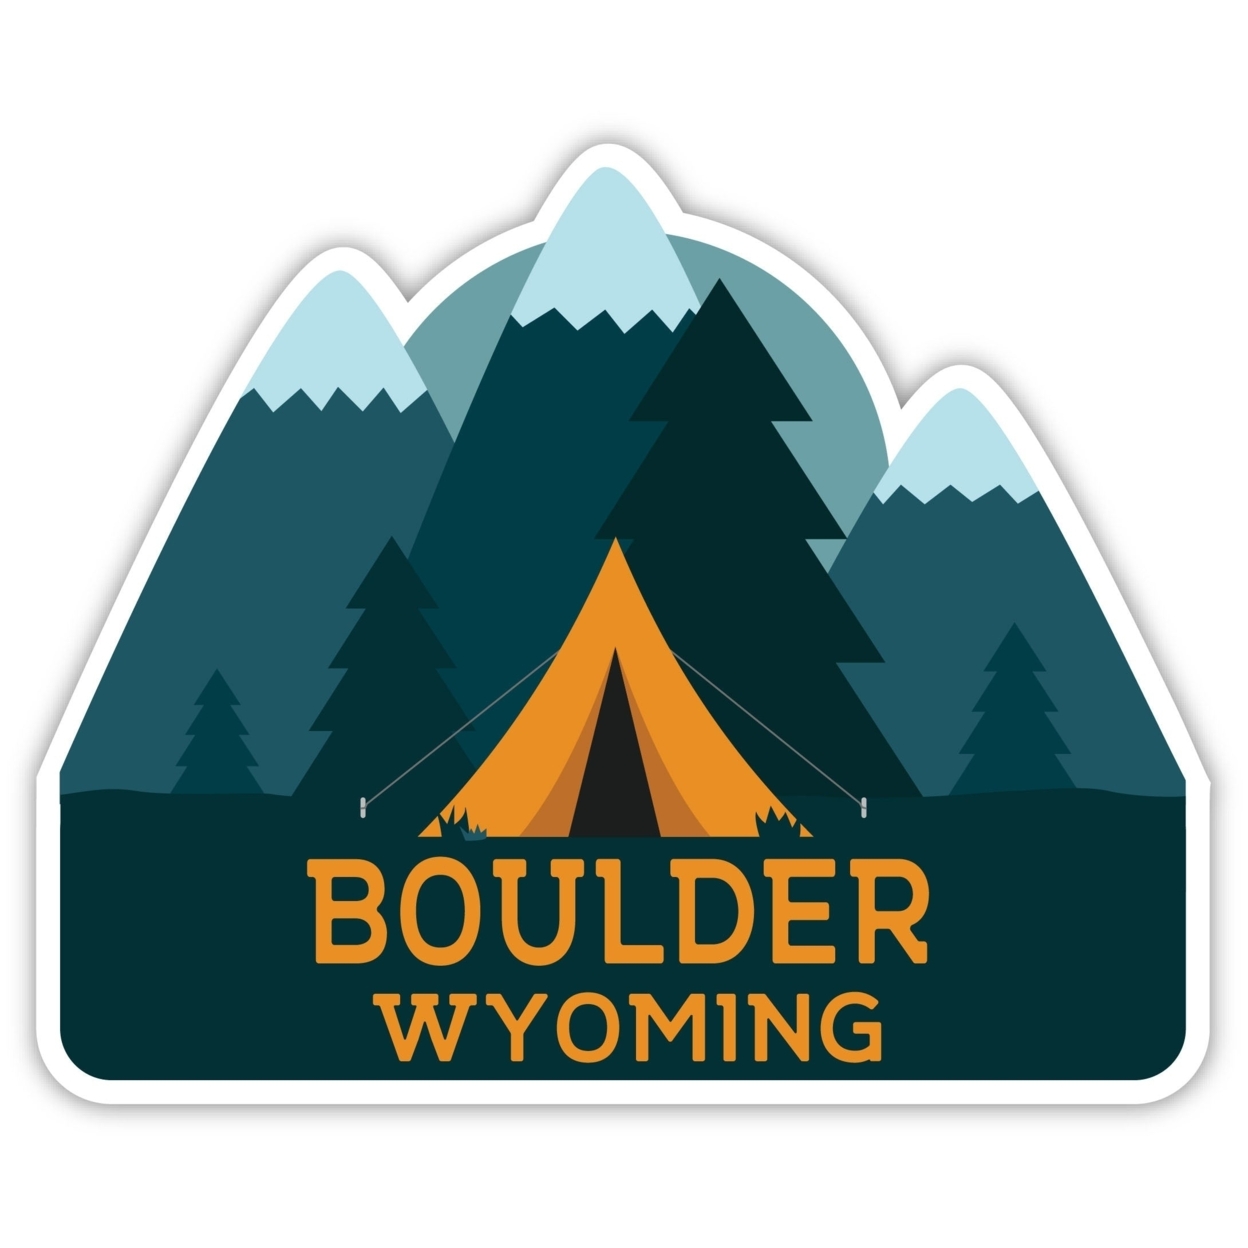 Boulder Wyoming Souvenir Decorative Stickers (Choose Theme And Size) - 4-Pack, 10-Inch, Tent